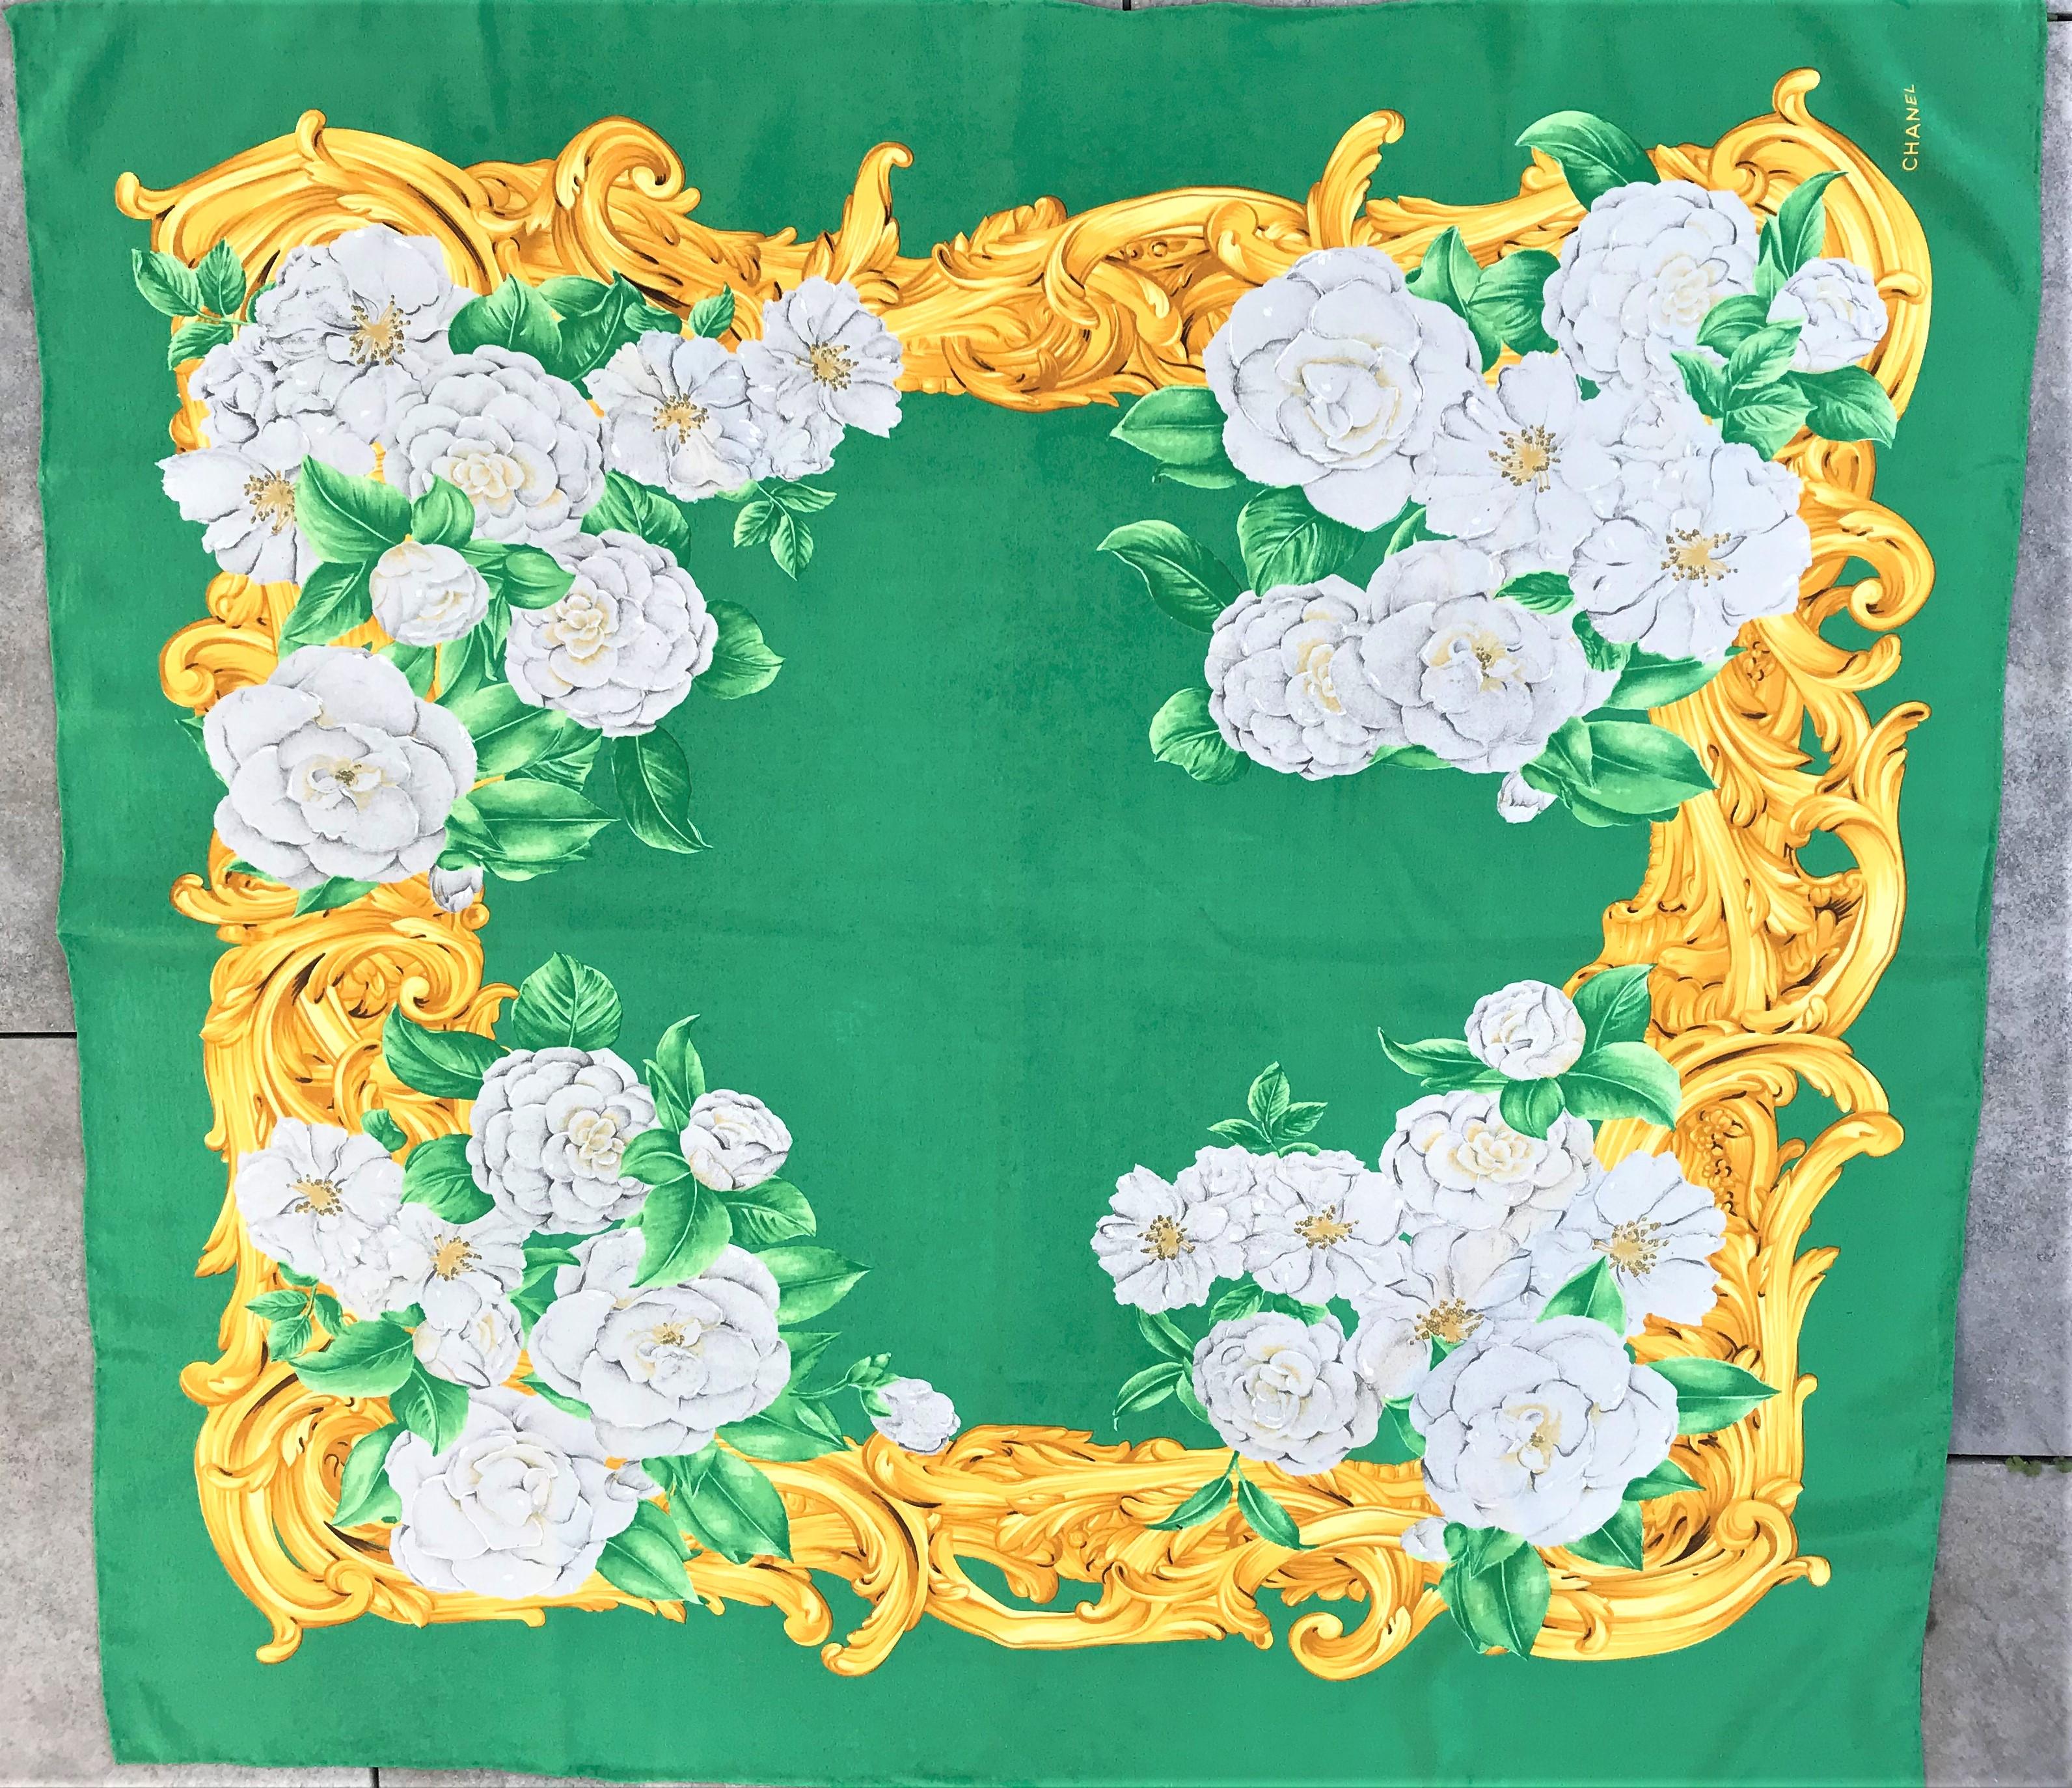 Vintage silk scarf by Chanel printed on a green background with Coco Chanel's favorite flower the Cameilia.
Green ground, different camellias in light gray with green leaves and gold-colored rocailles bordered. The scarf is hand rolled and in good